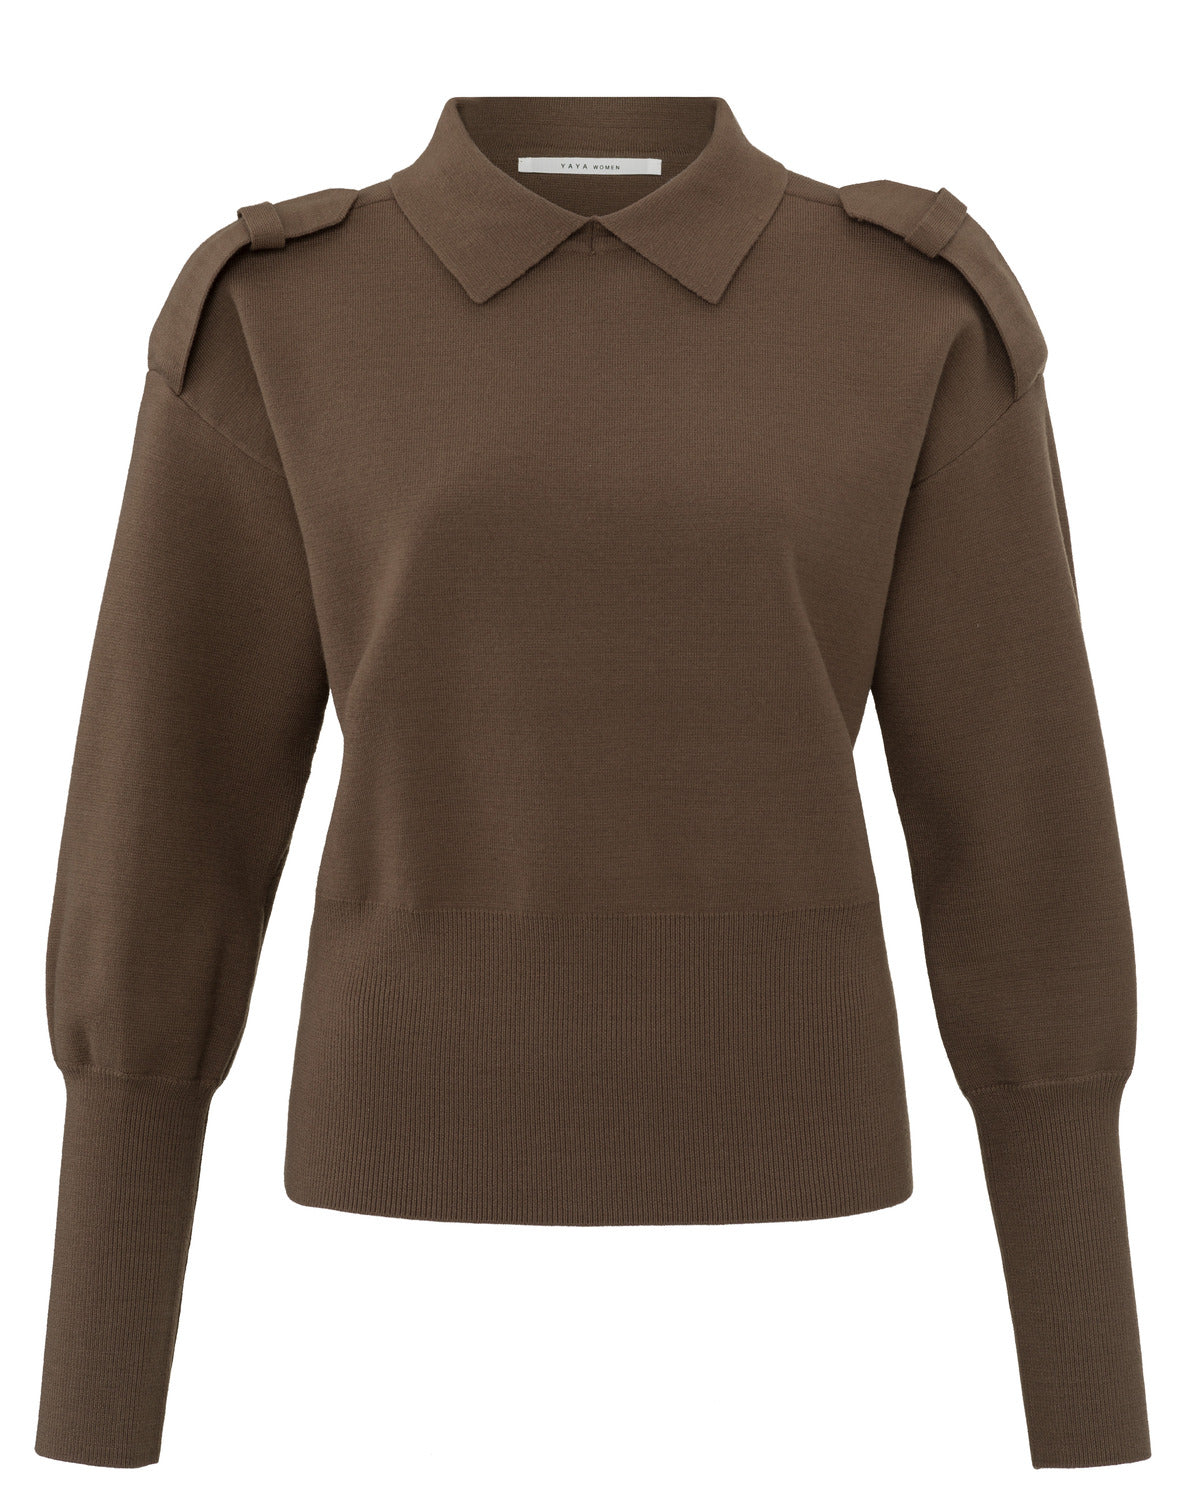 Sweater with Epaulettes - Coca Mocha Brown